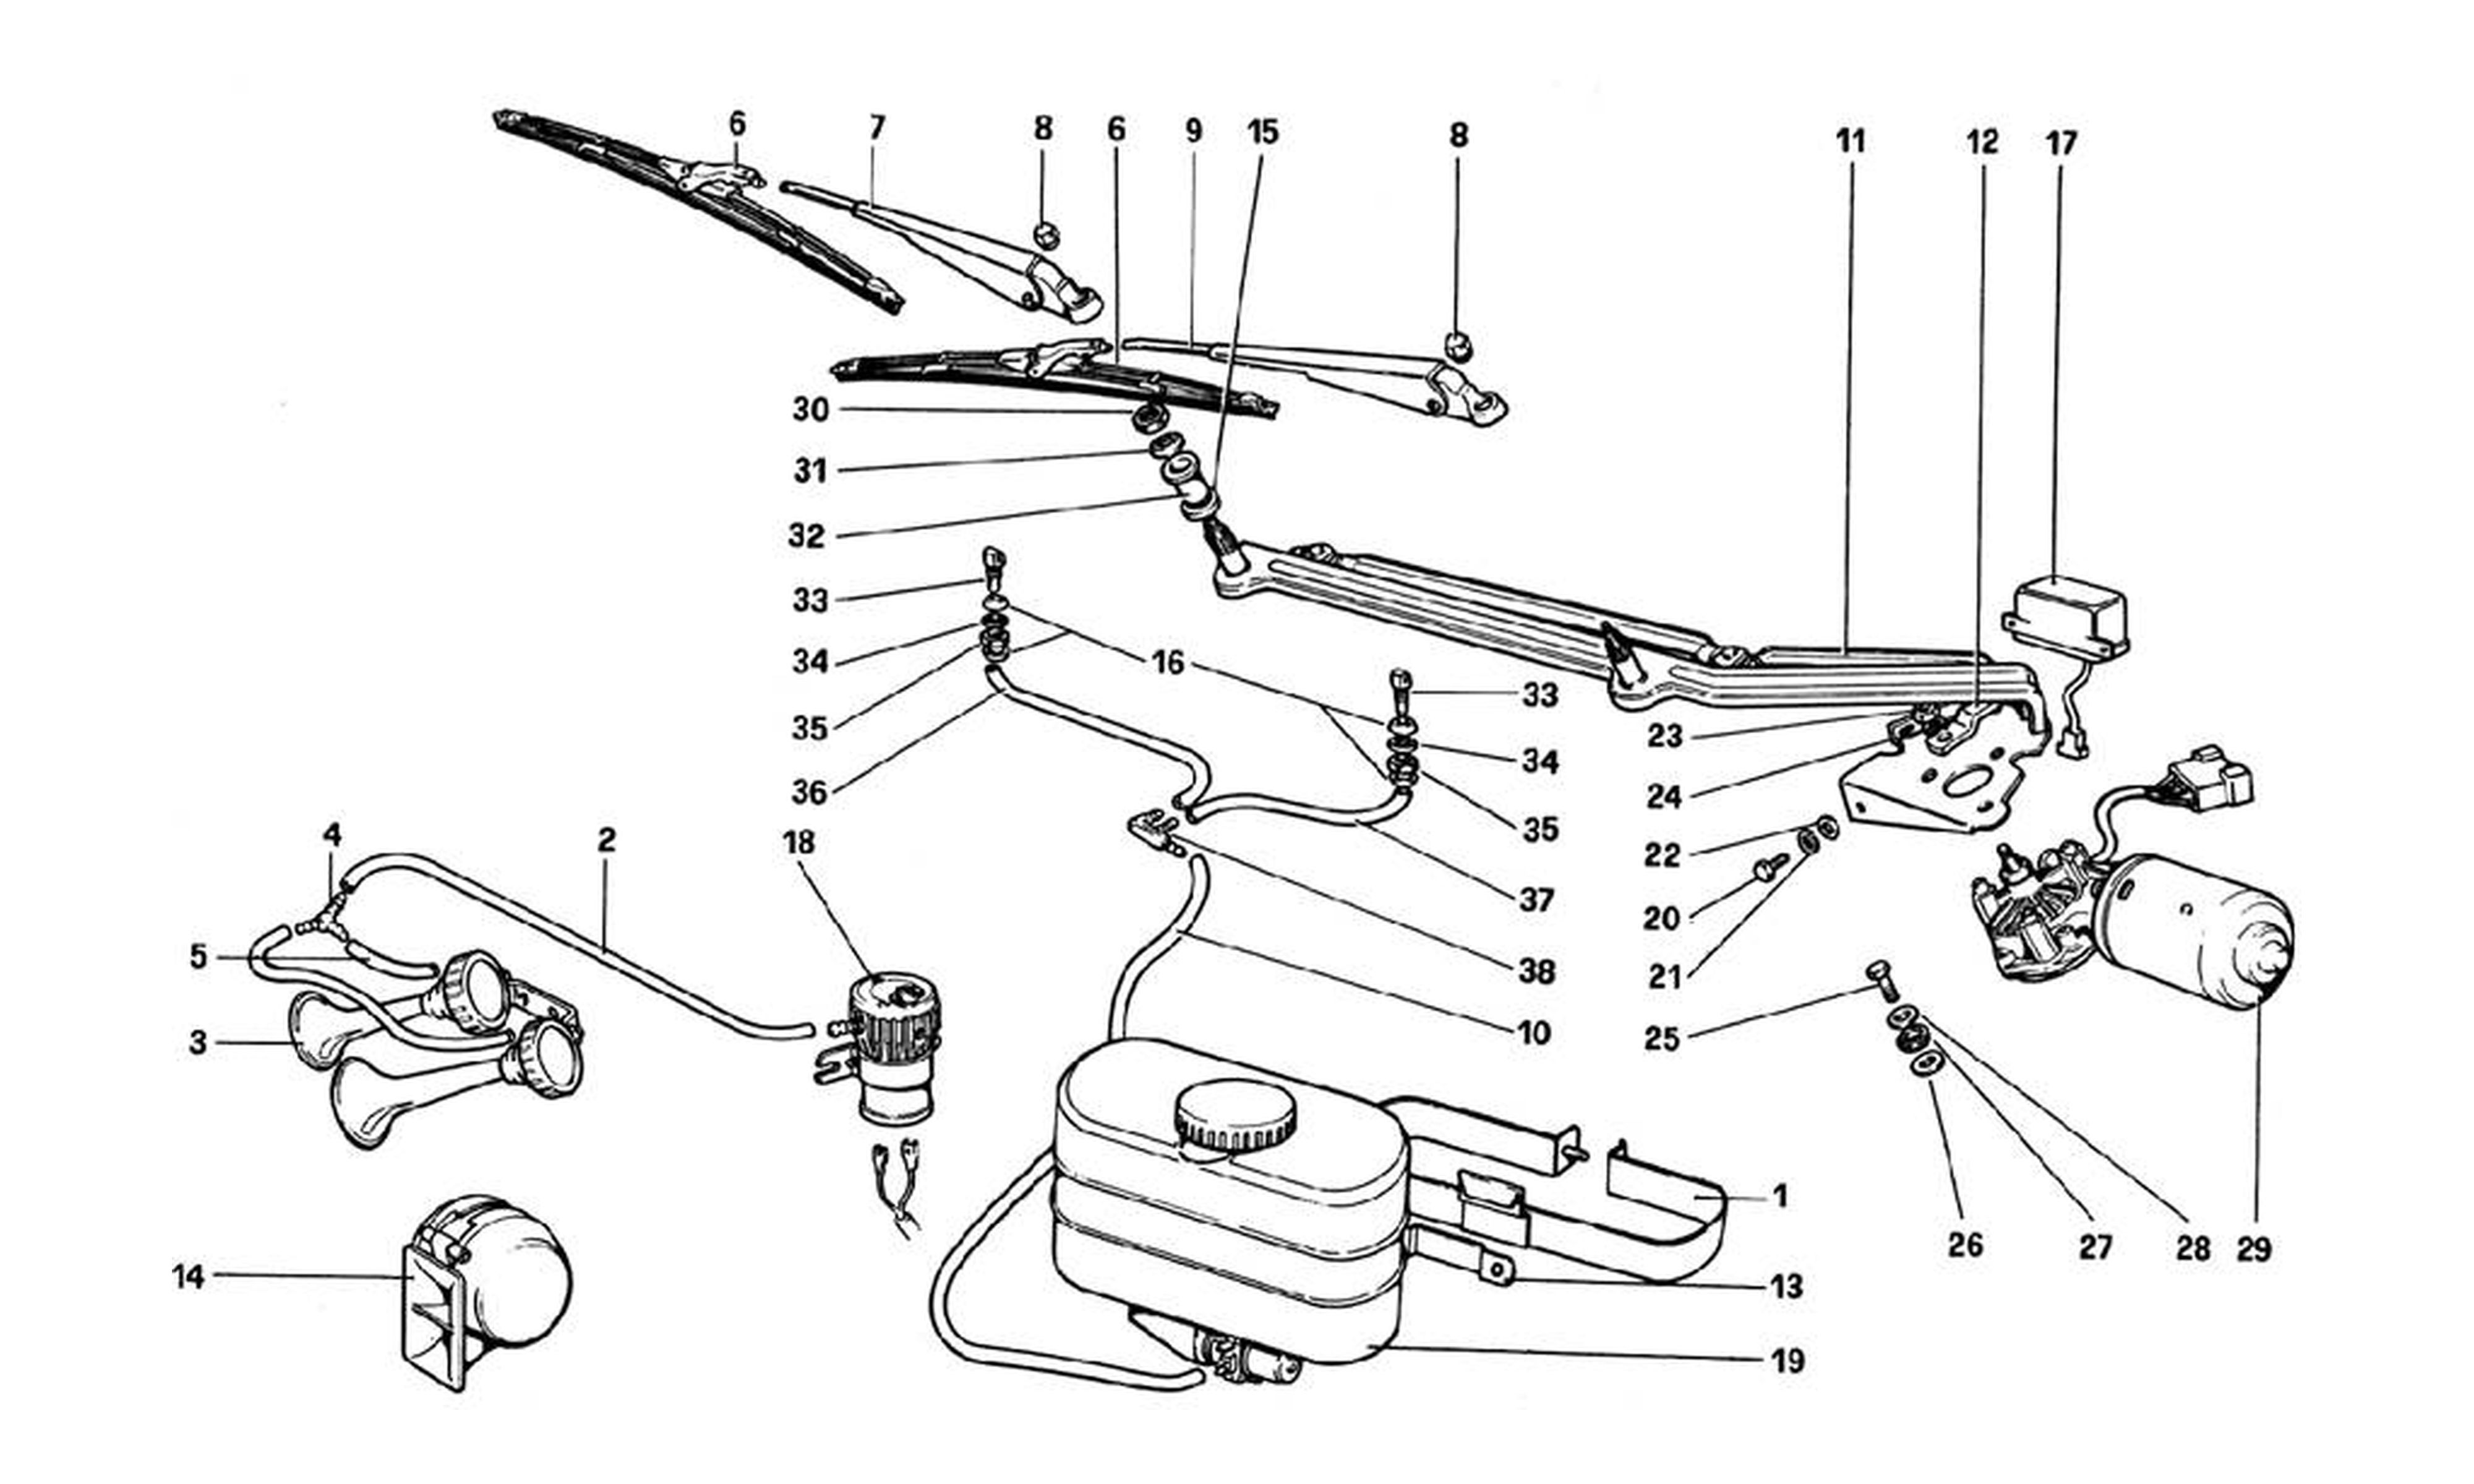 Schematic: Windshield Wiper, Washer And Horn (Variants For Rhd - Aus Versions)